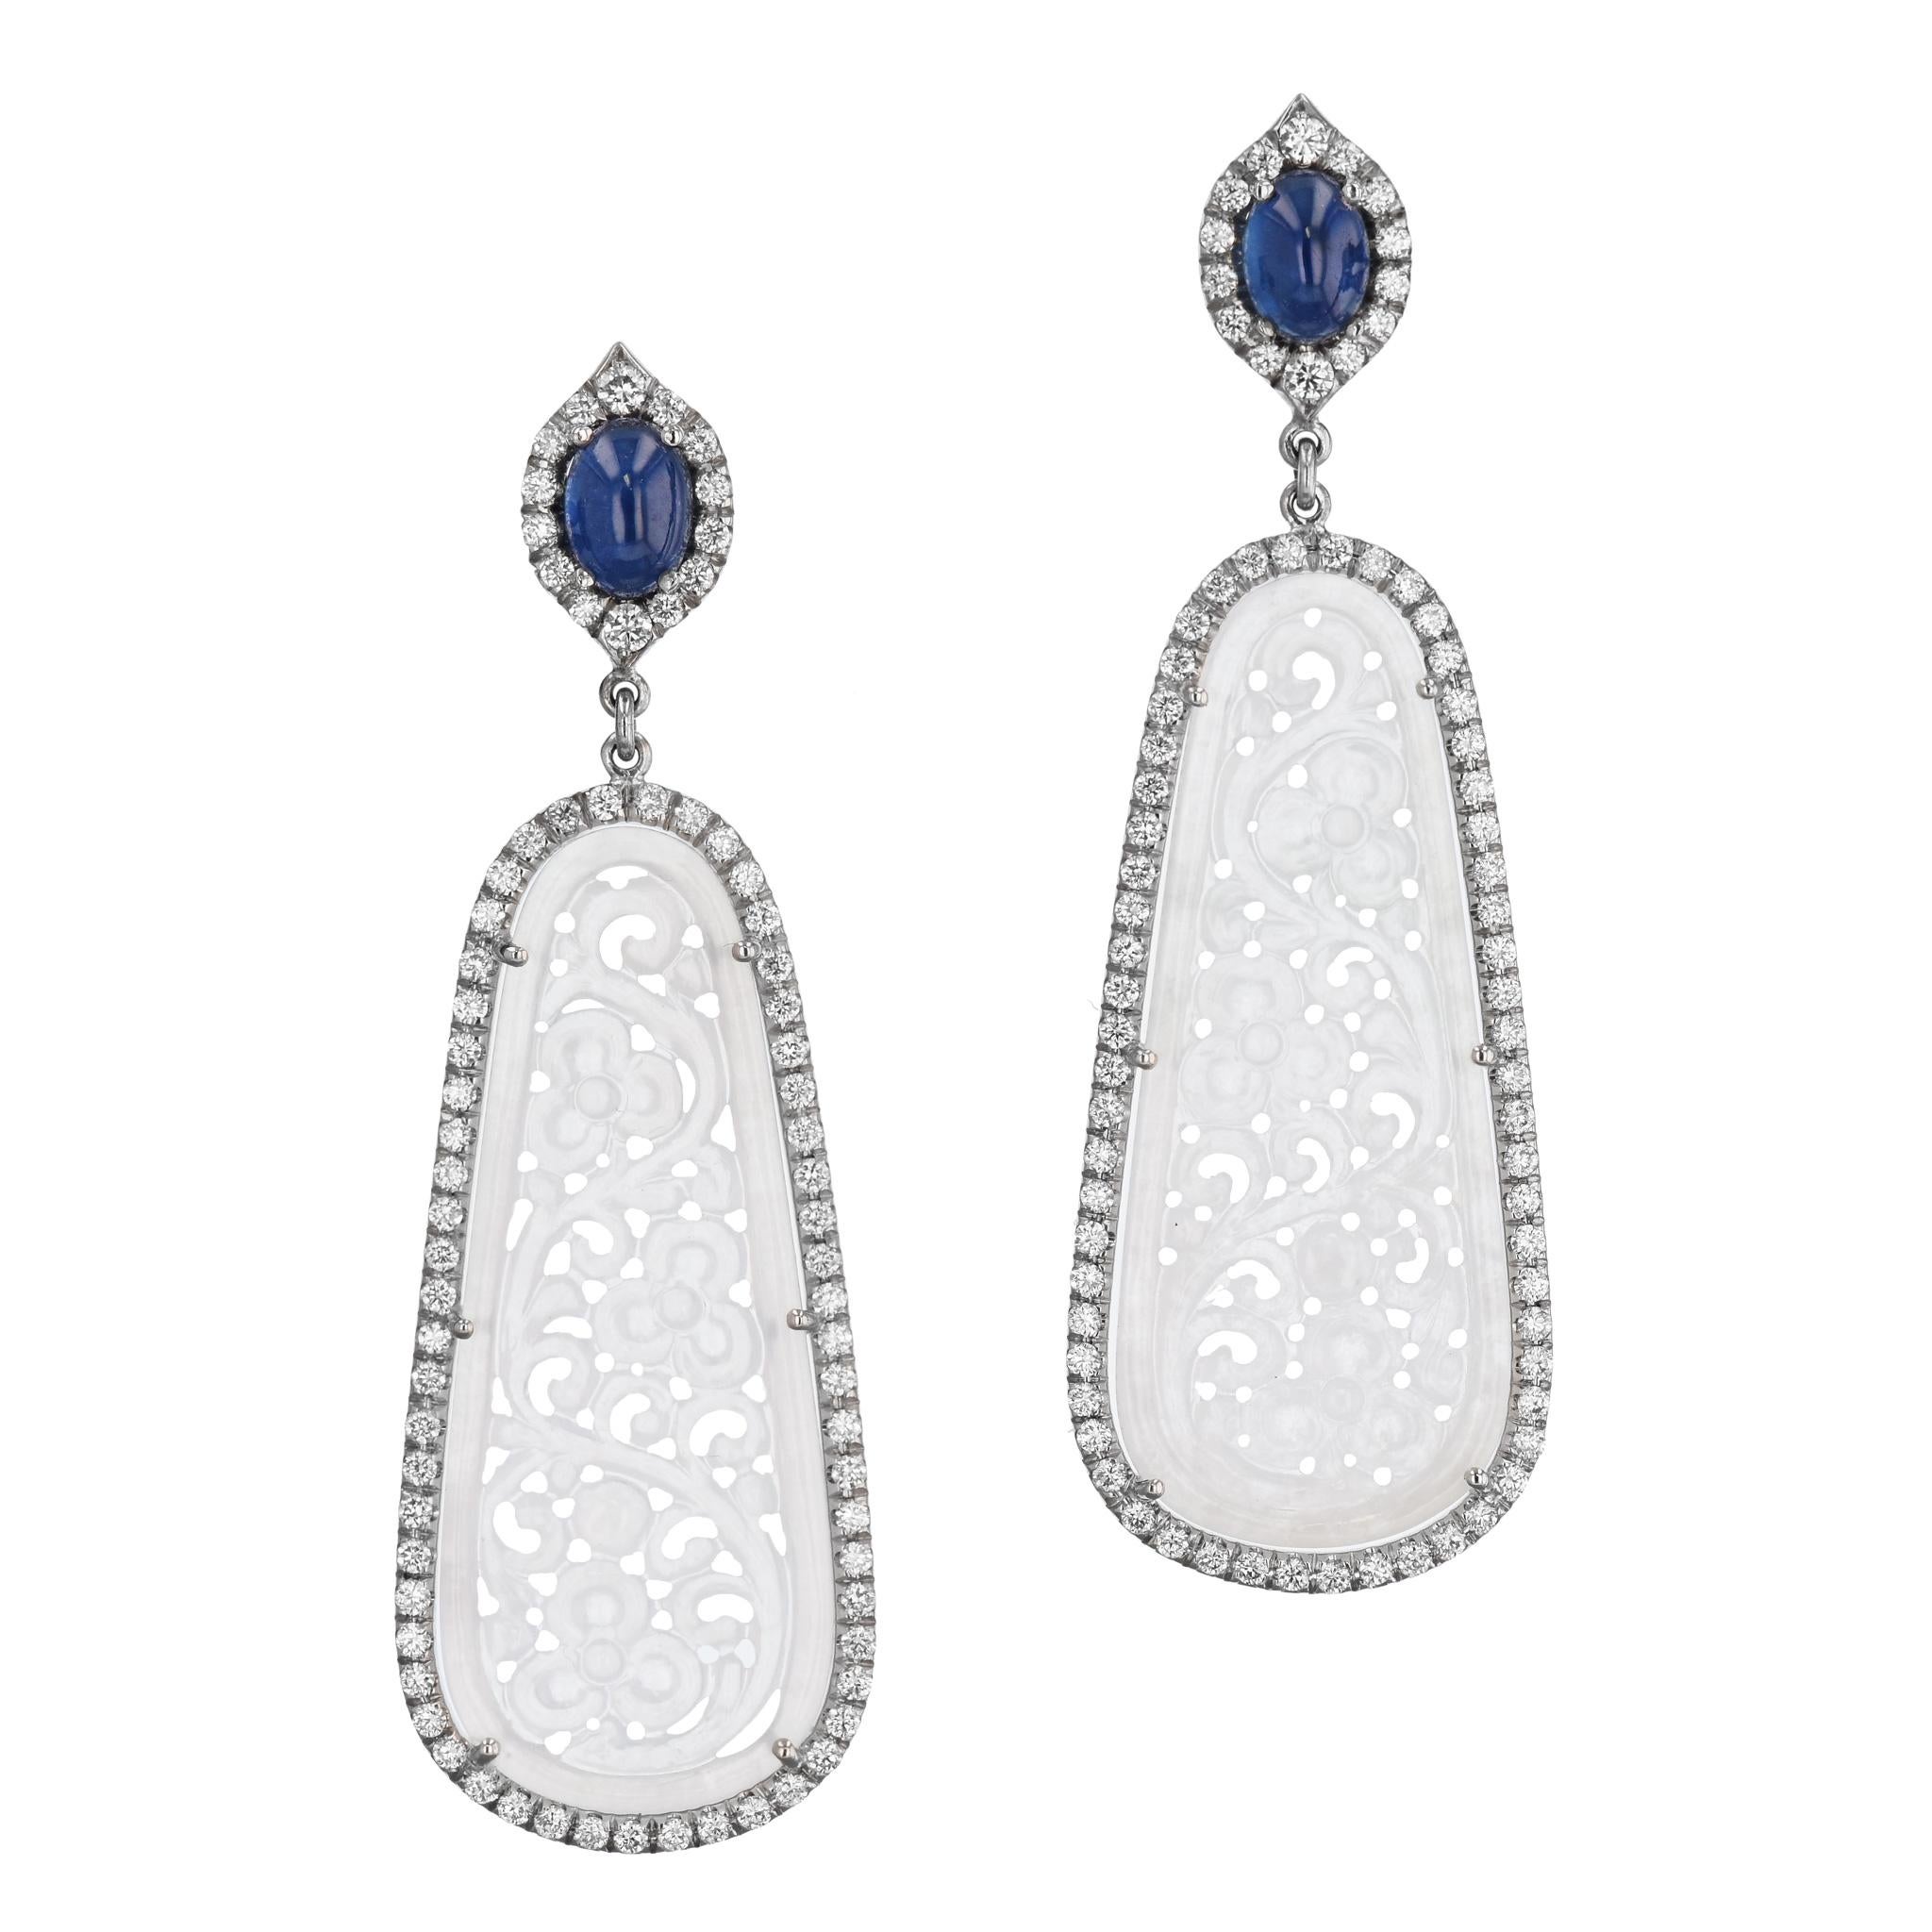 These stunning one of a kind, handcrafted icy jadeite earrings feature captivating 38 mm x 15 mm oblong carved oval jadeites and stunning cabochon sapphires set in diamonds pave halos. 
These magnificent 18 karat white gold drop earrings are a true